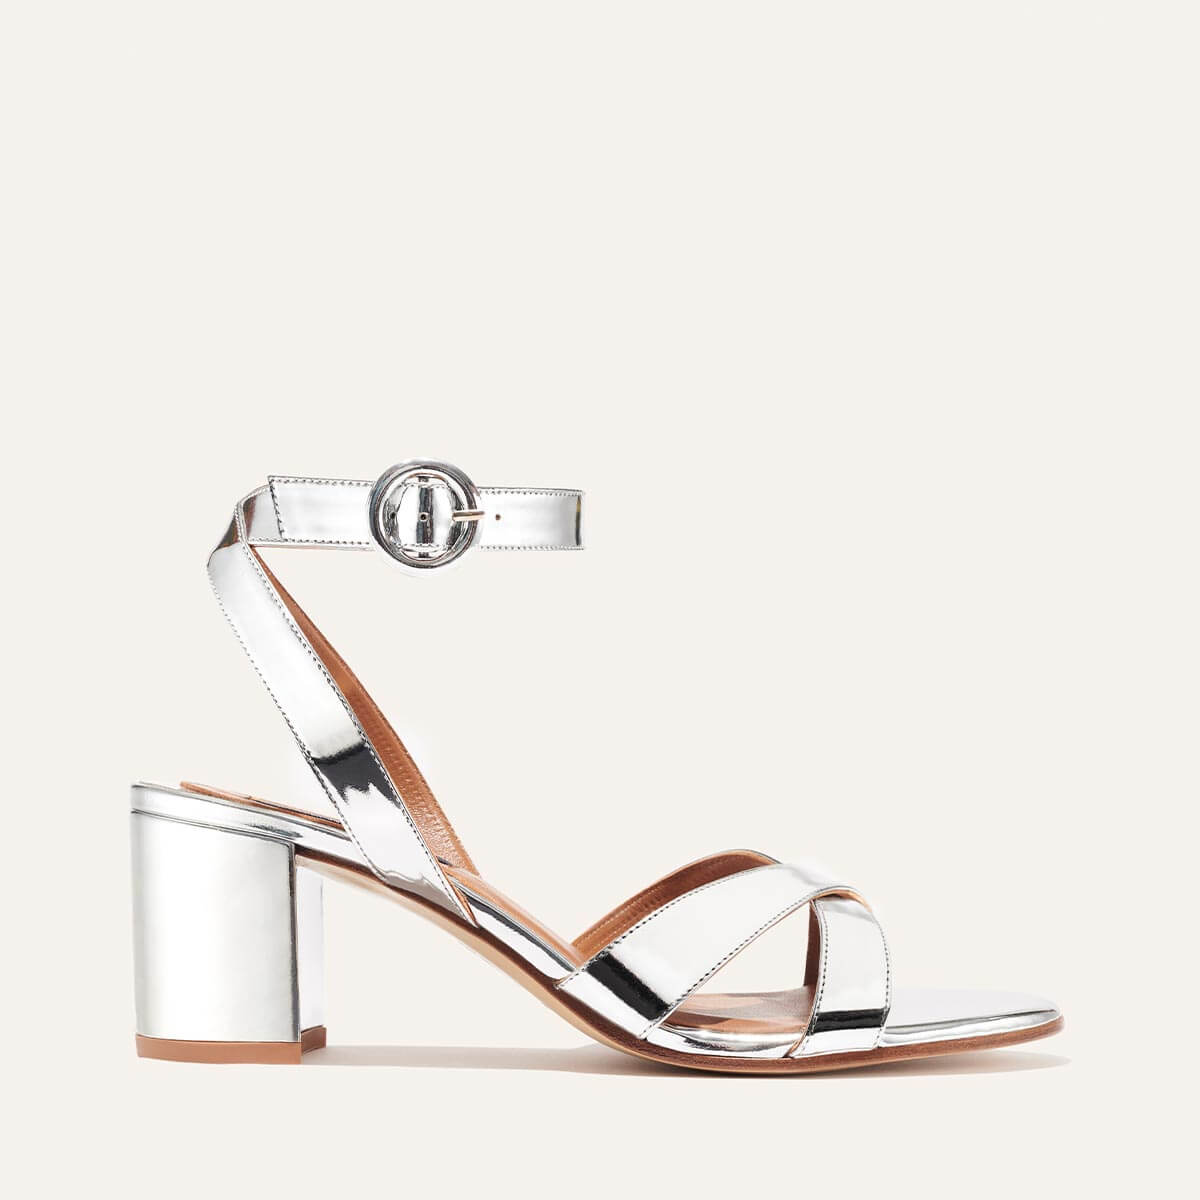 Margaux's classic City Sandal in metallic silver patent leather with comfortable straps and a walkable block heel